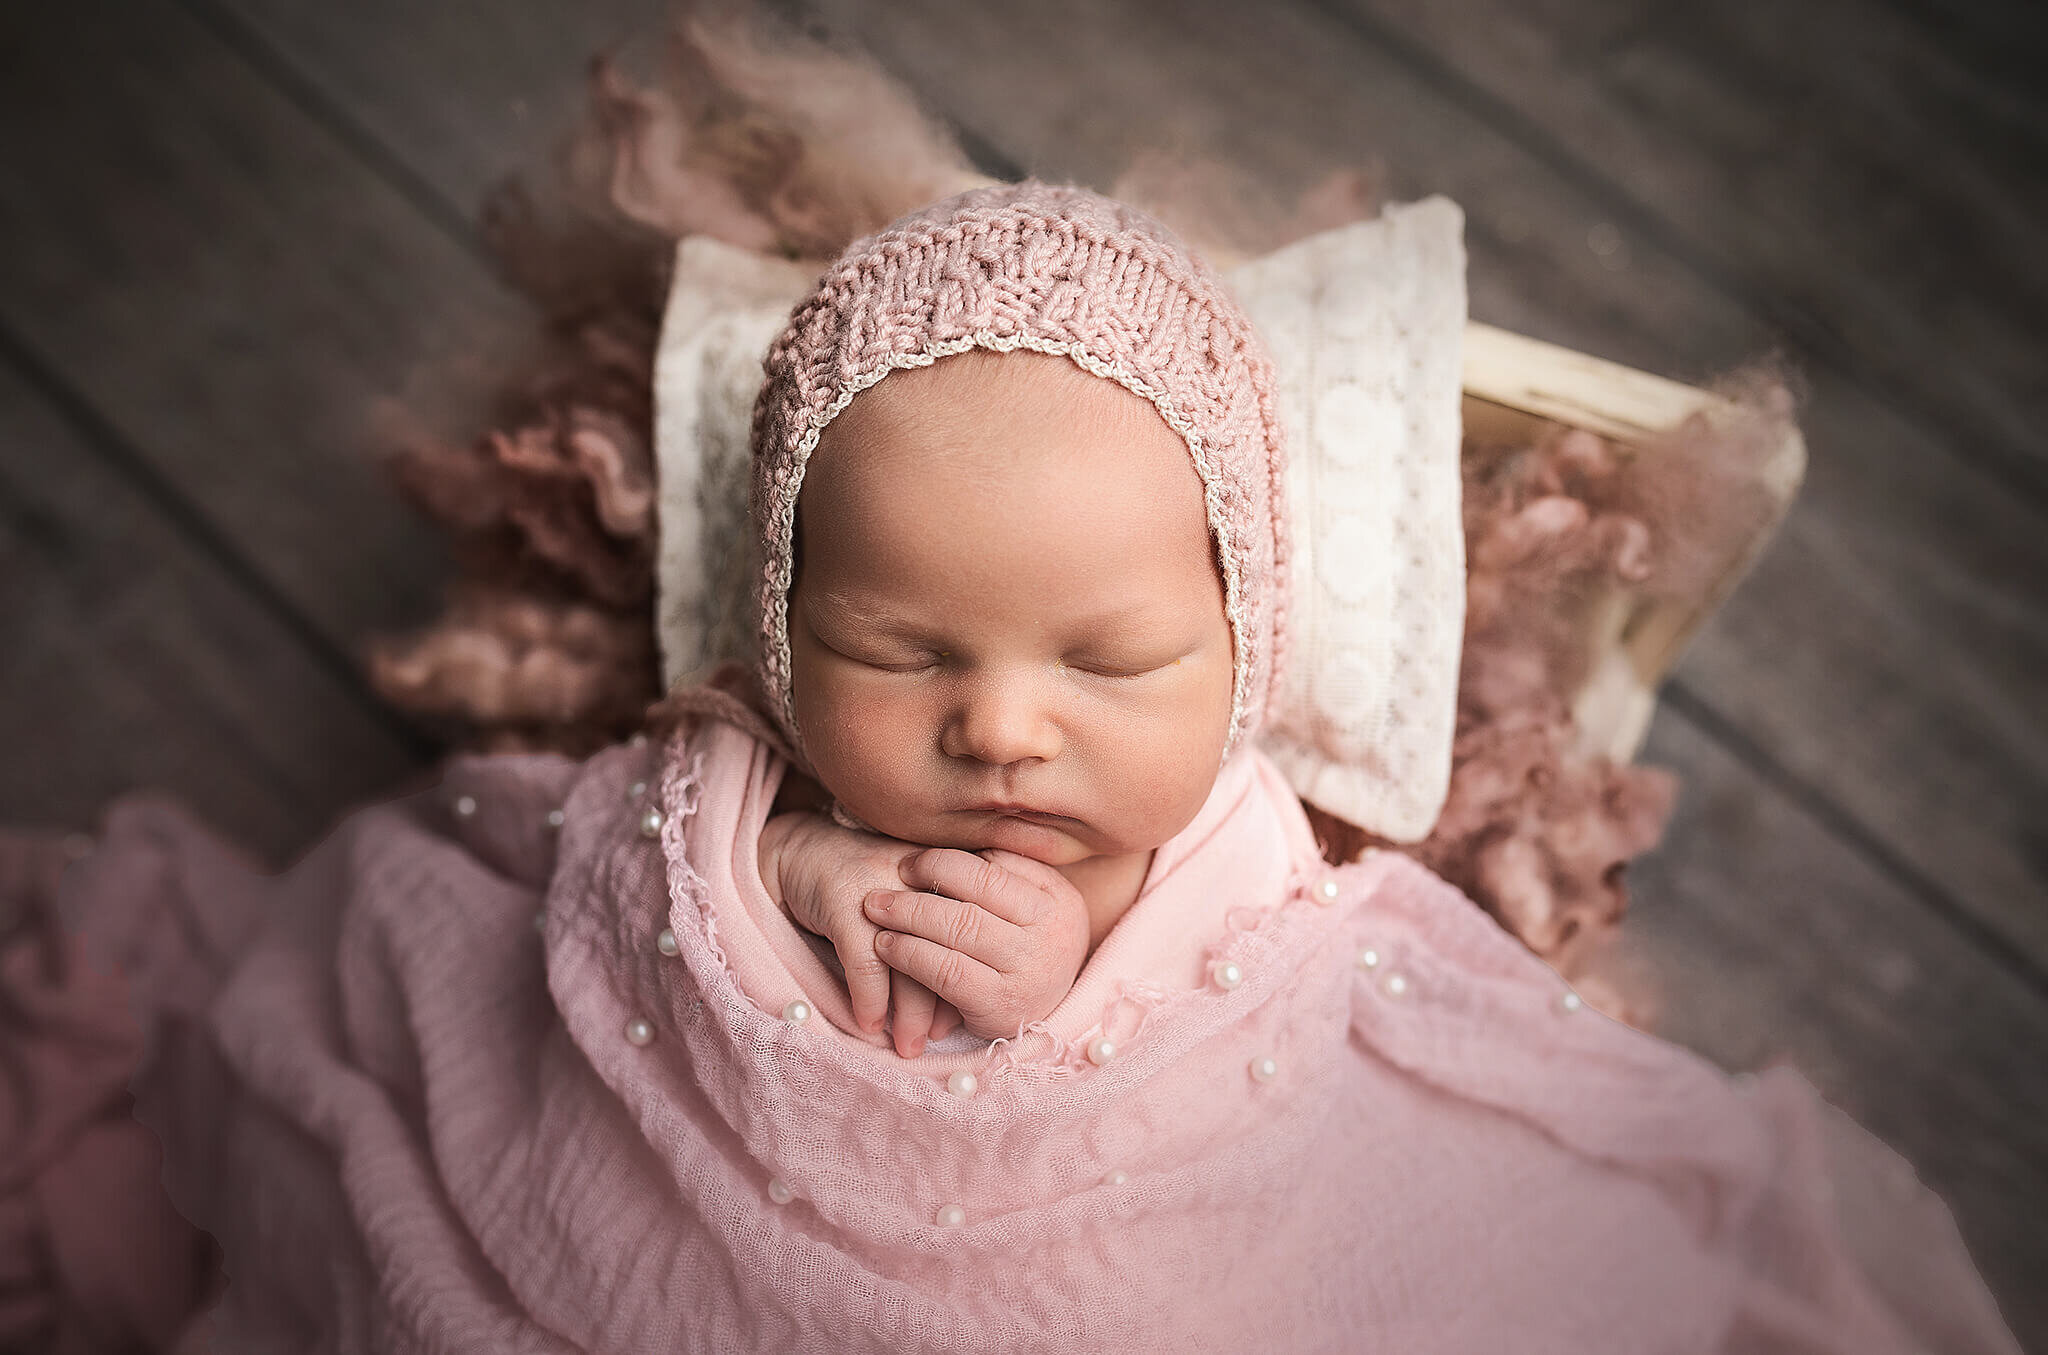 newborn girl in little white bed covered with cute pink blanket with pearls and a little pink knit hat